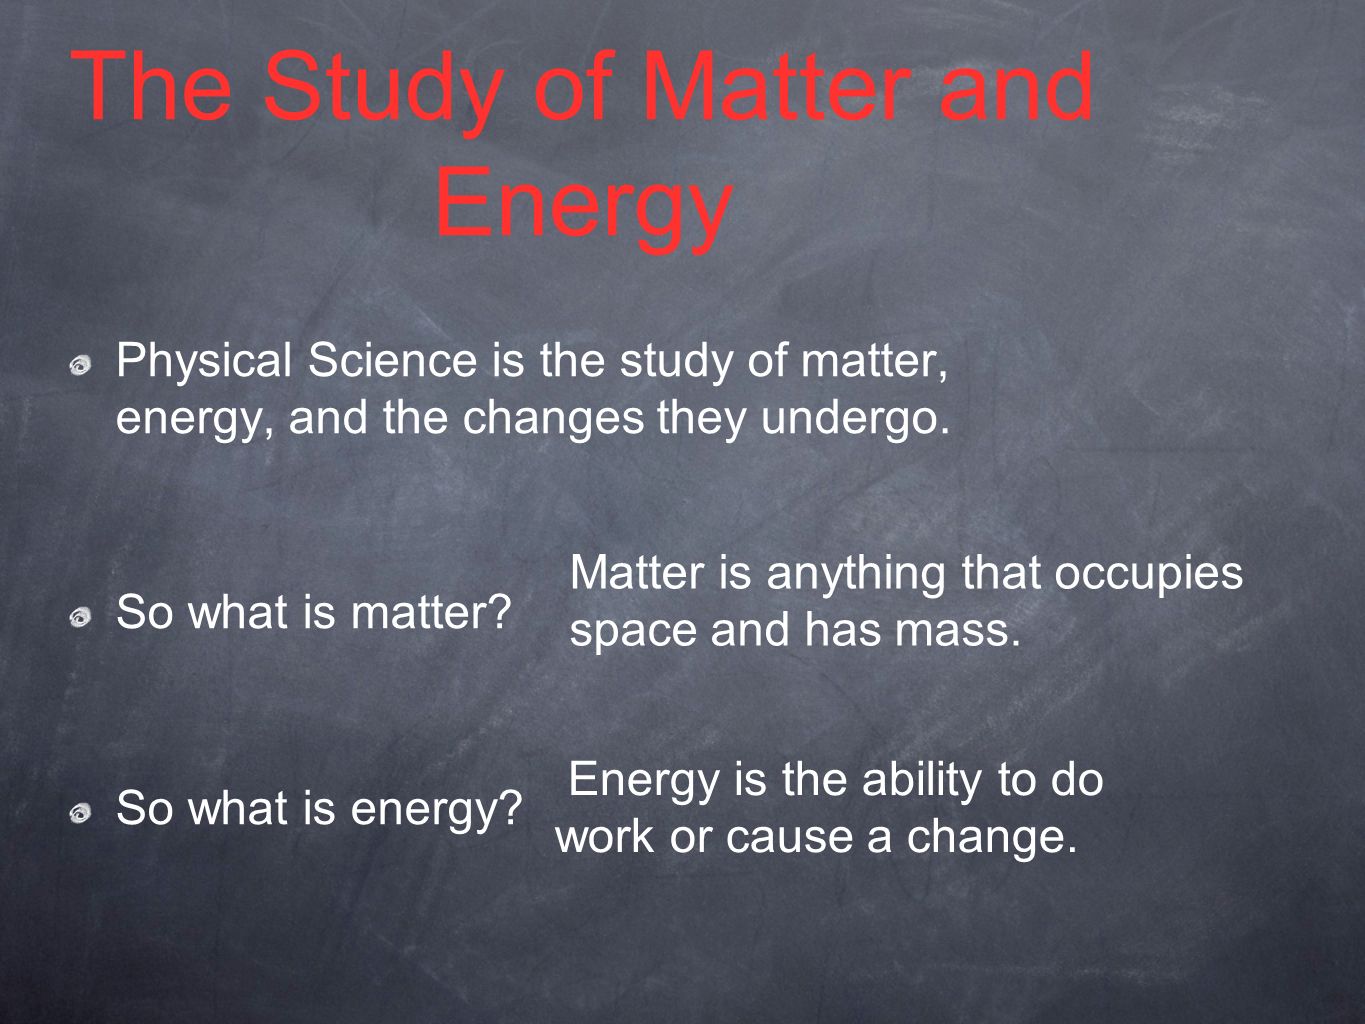 The Study of Matter and Energy